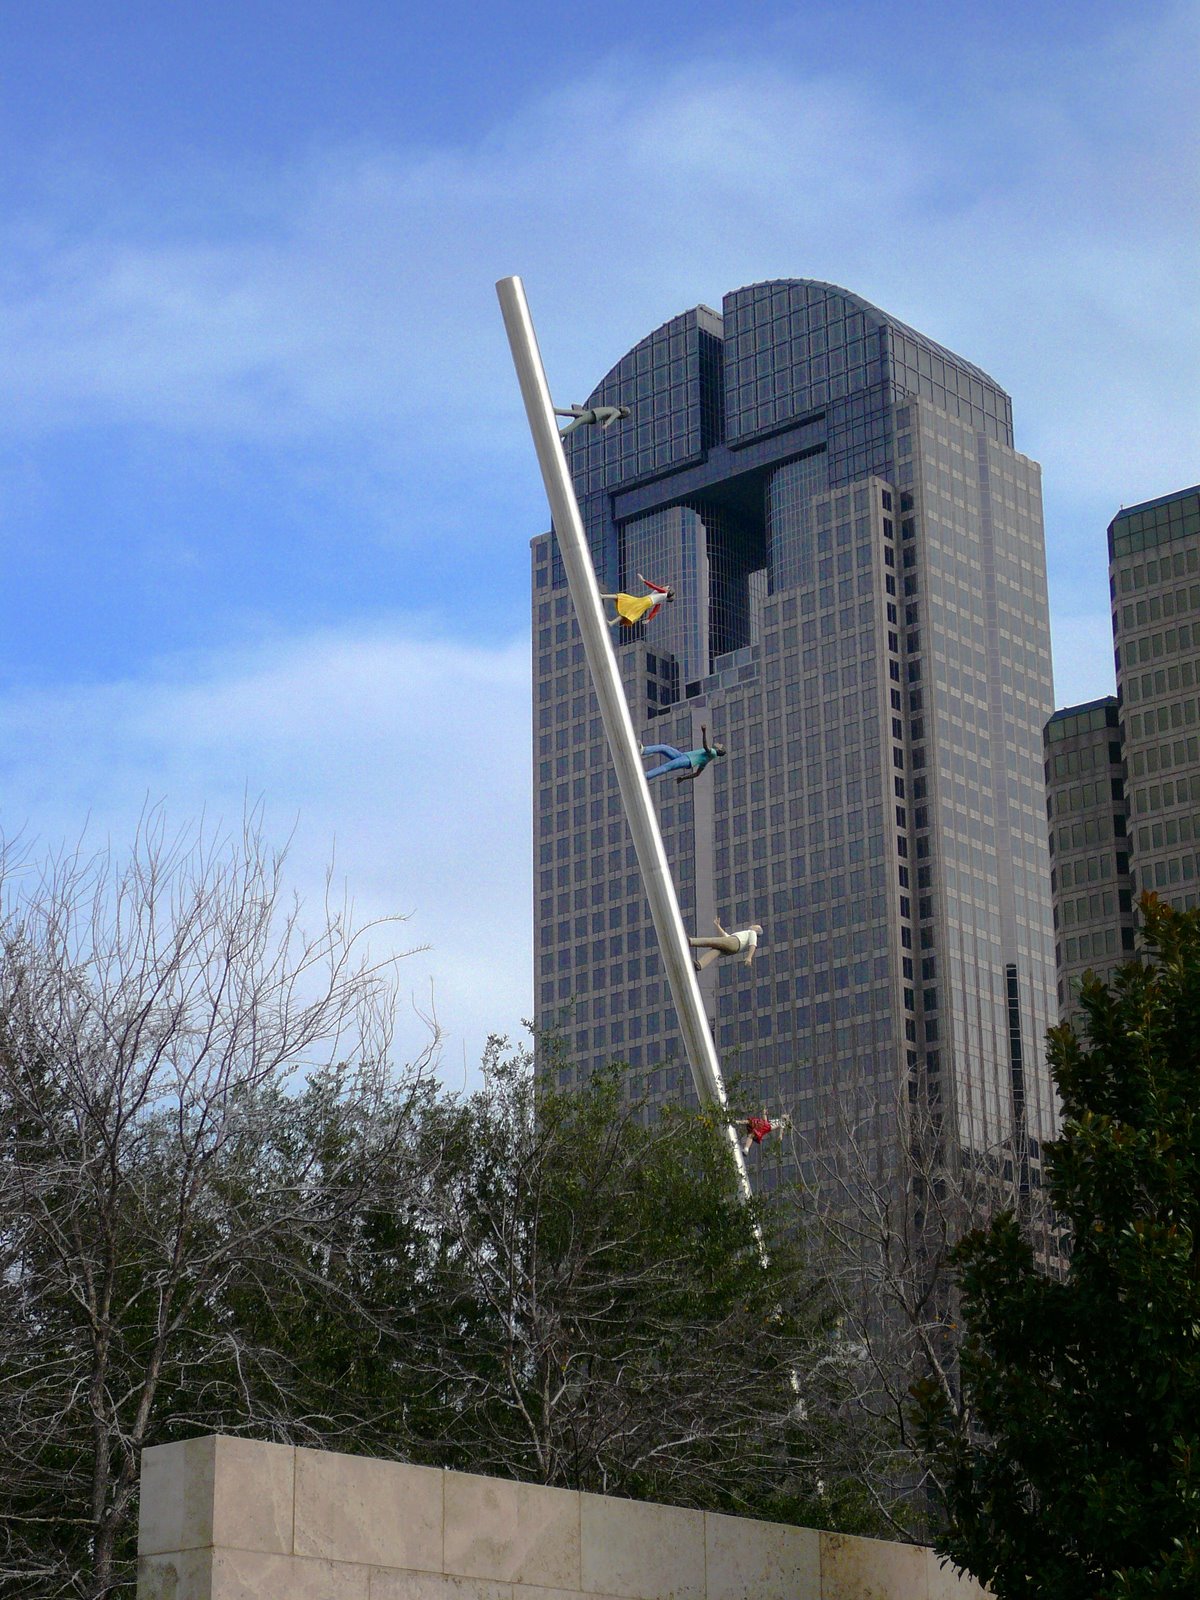 [Nasher+Sculpture+with+downtown.jpg]